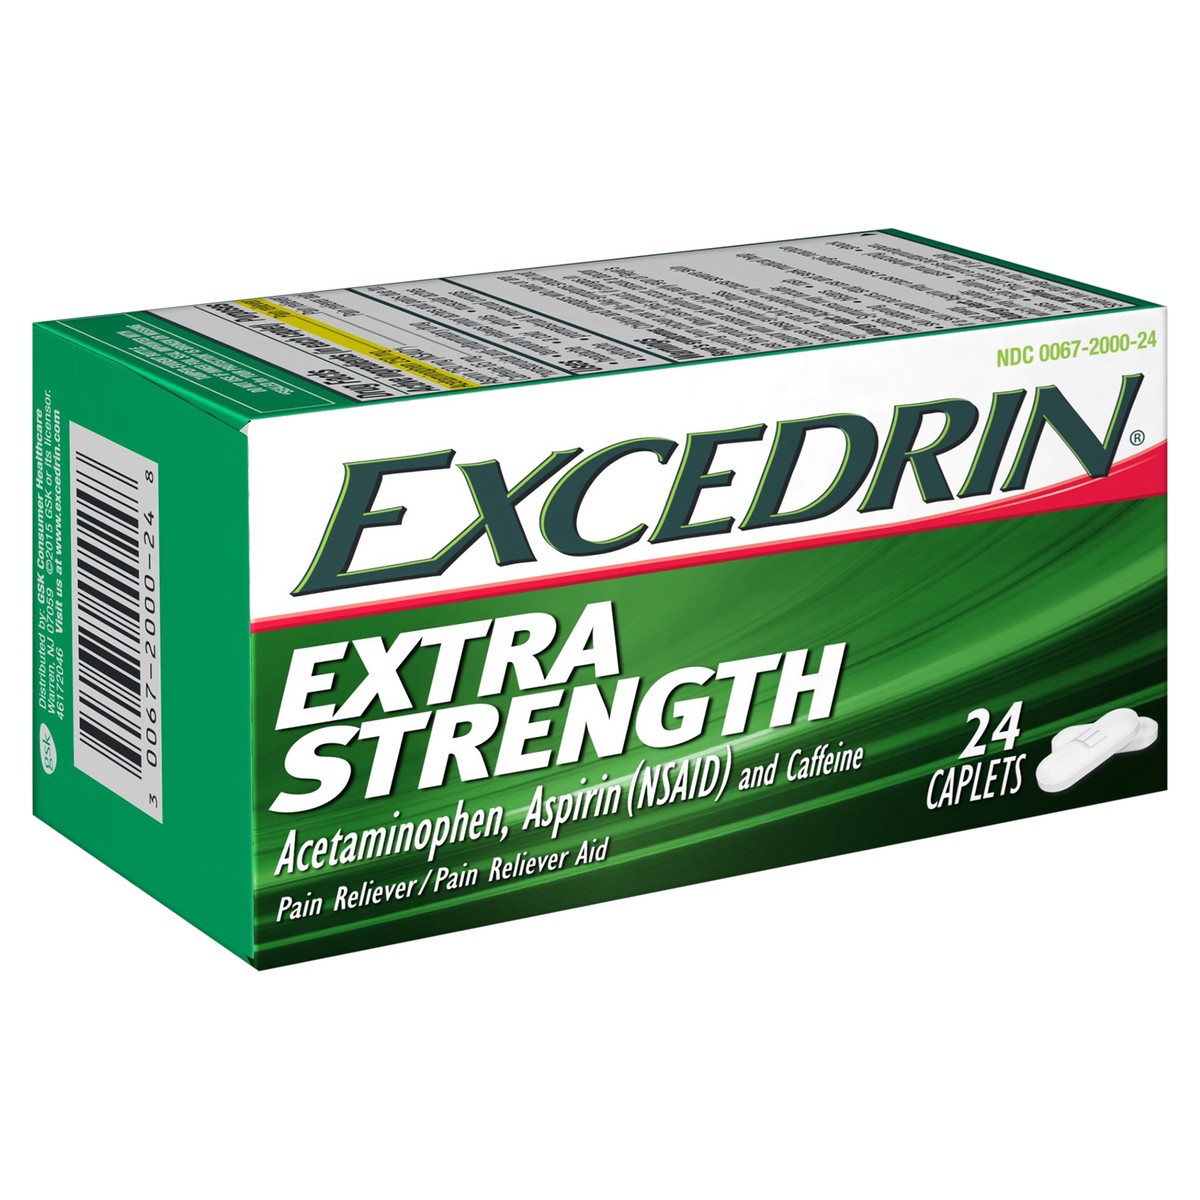 slide 2 of 9, Excedrin Extra Strength Pain Reliever / Pain Reliever Aid Caplets, 24 ct